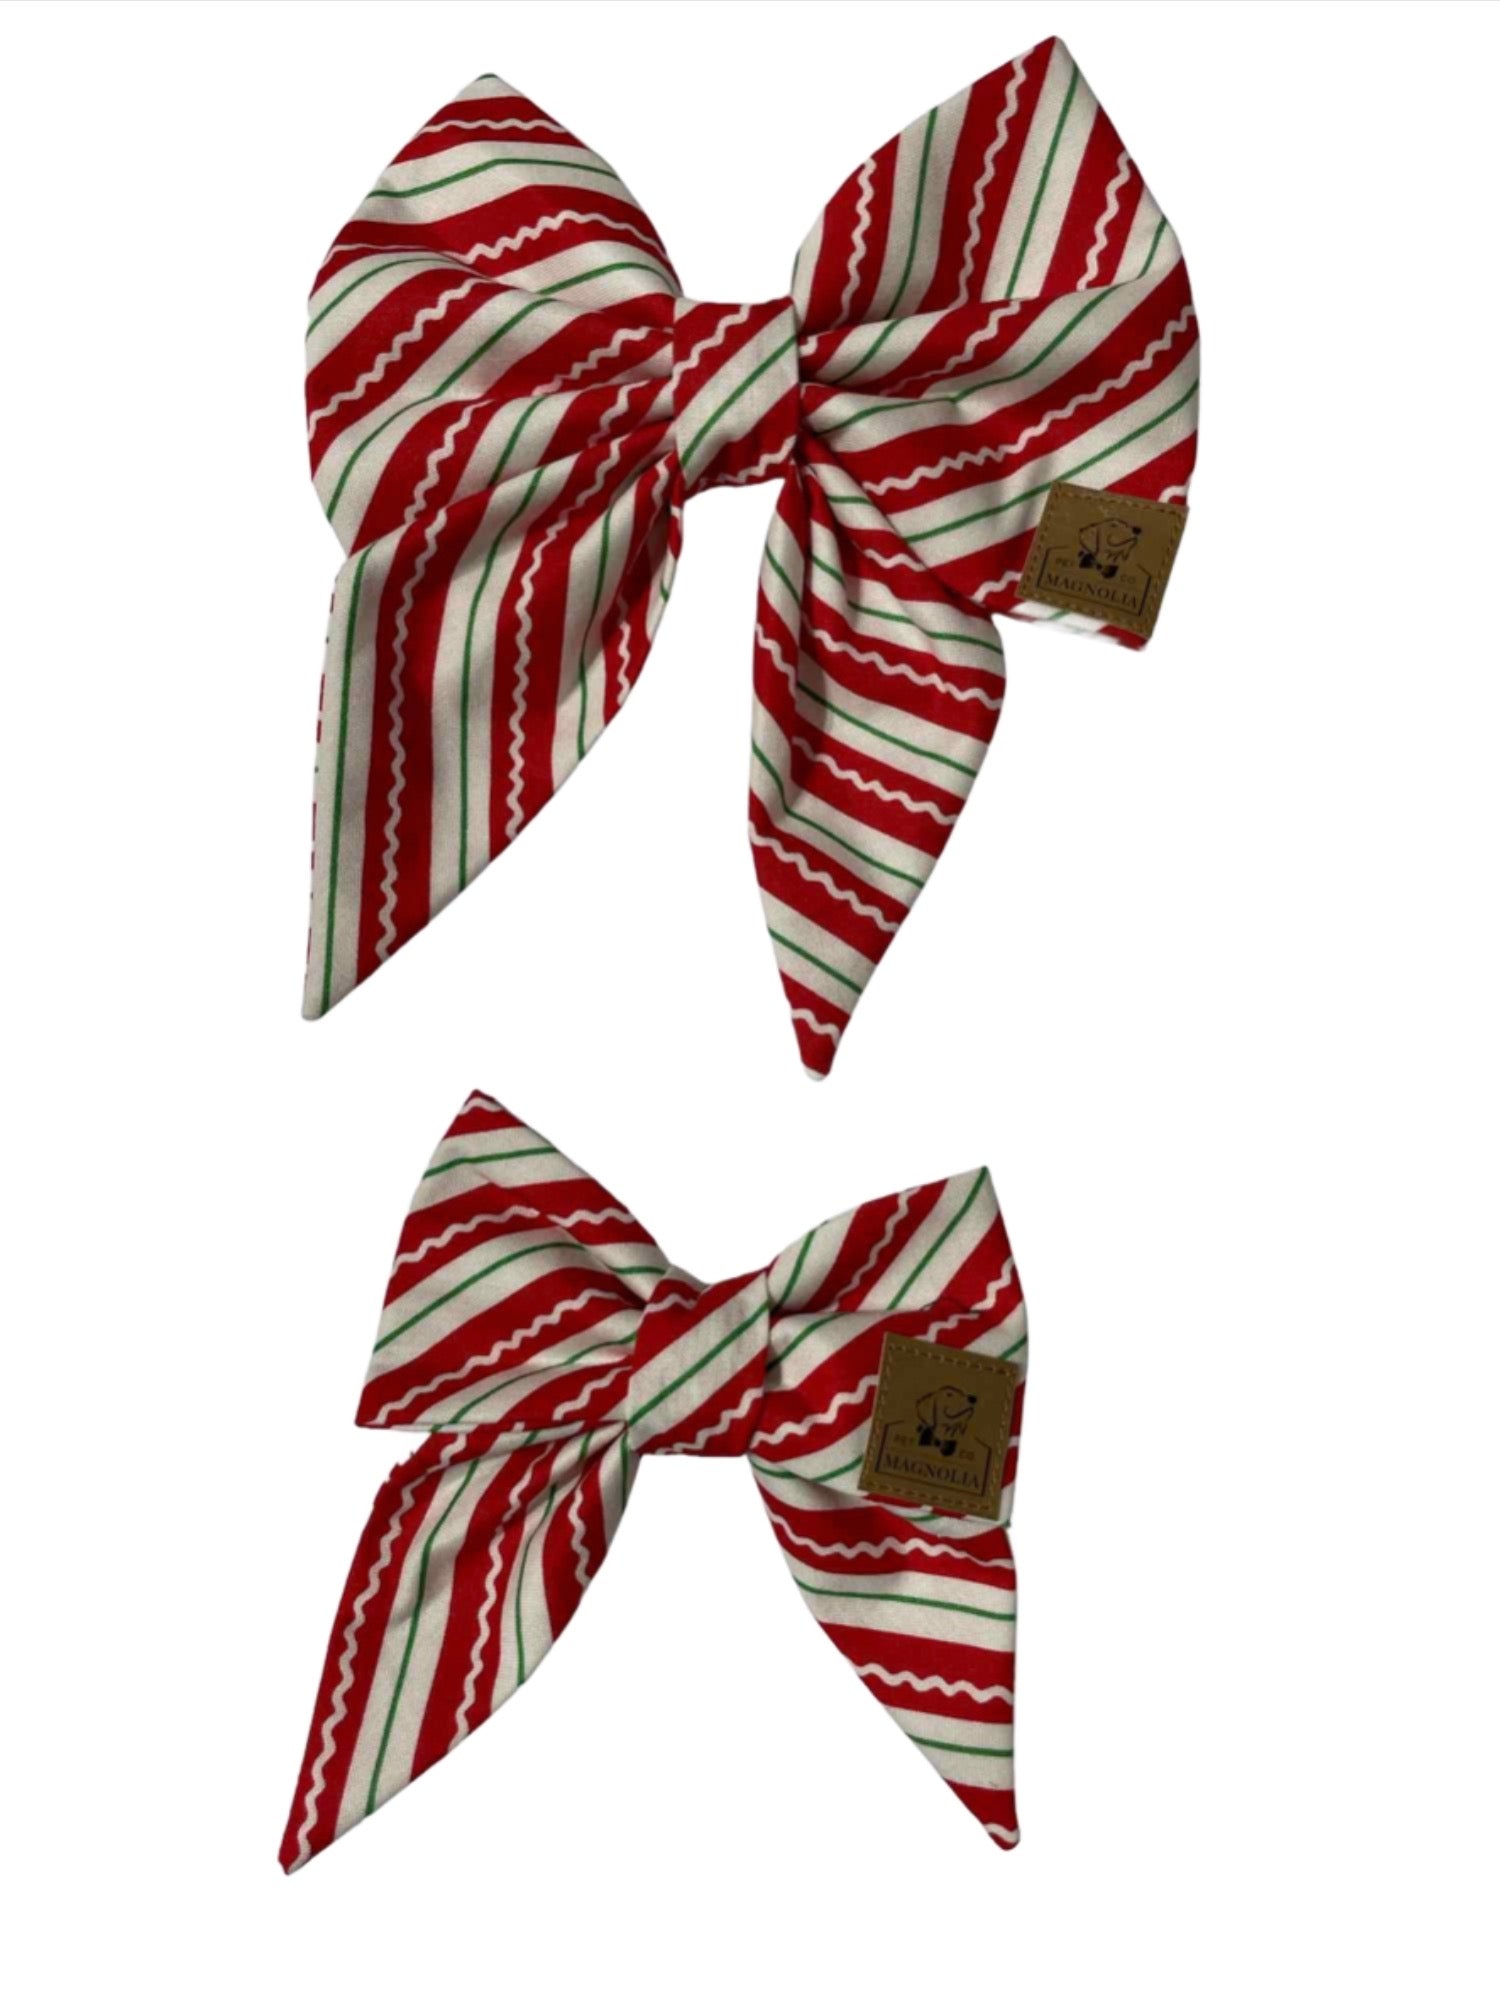 Dog bow featuring playful red and green diagonal stripes, reminiscent of classic candy canes by Magnolia Pet Company.